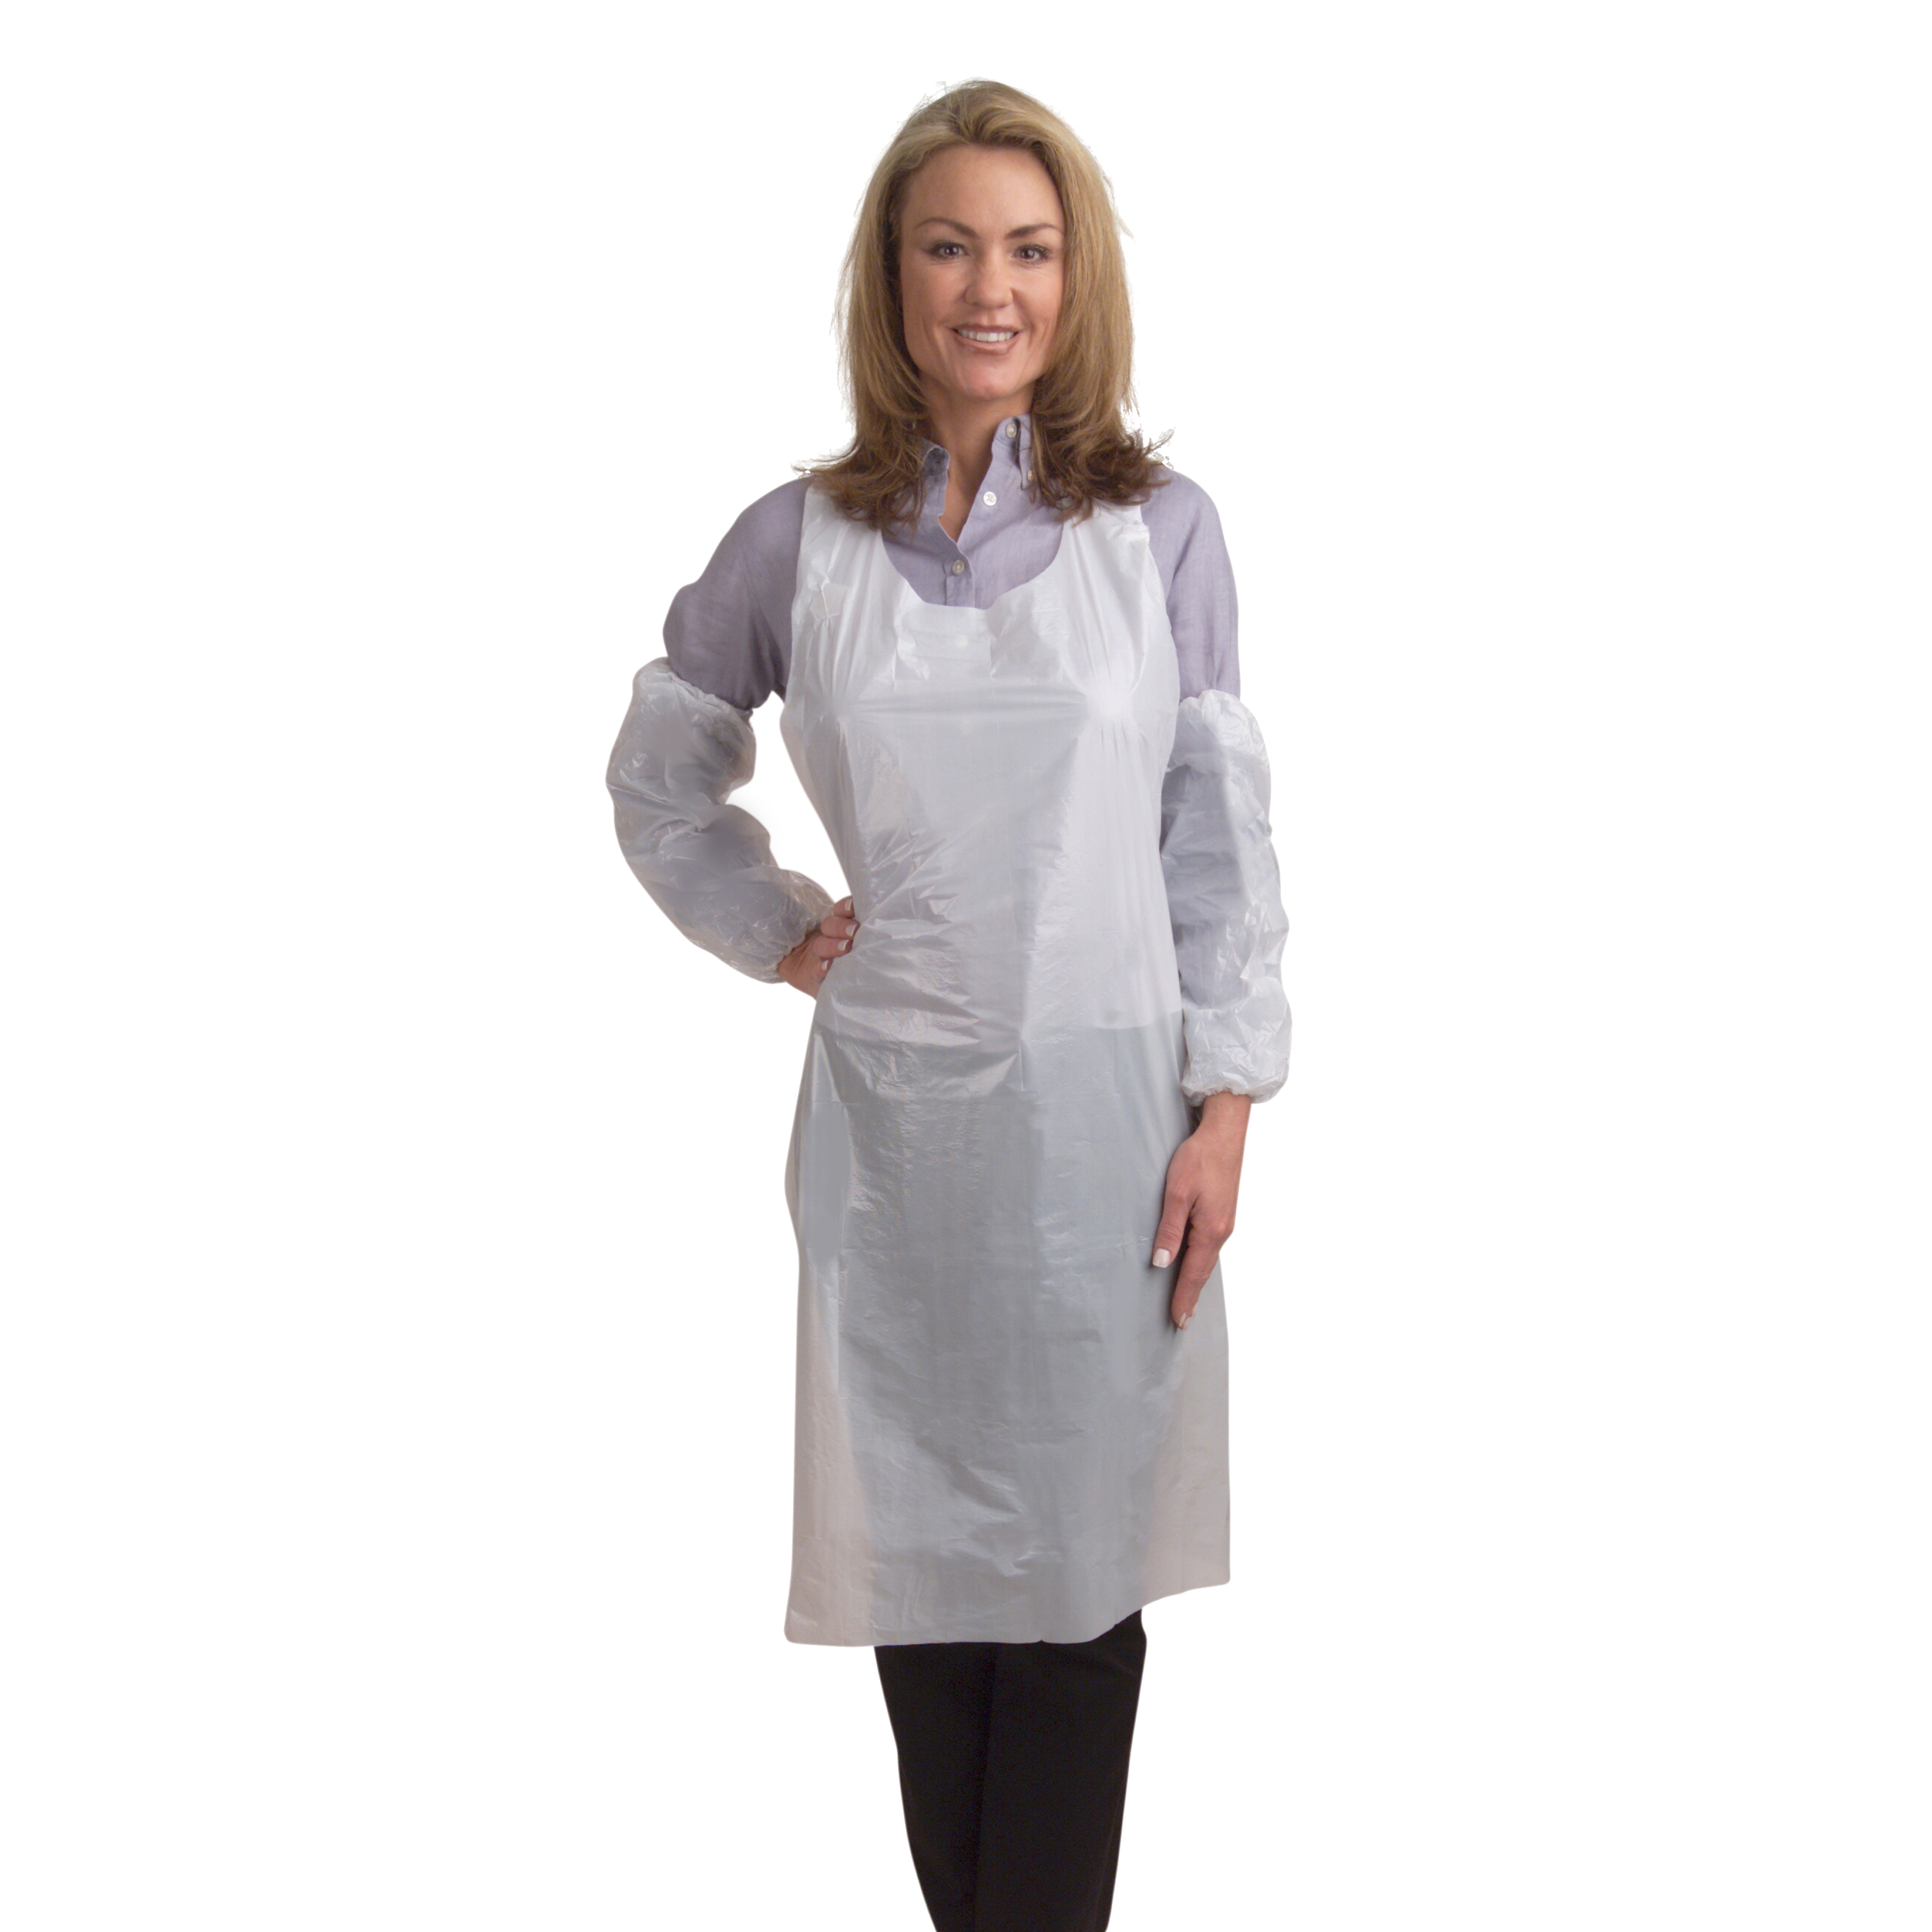 Disposable apron embossed
PA2846 10/100/CS